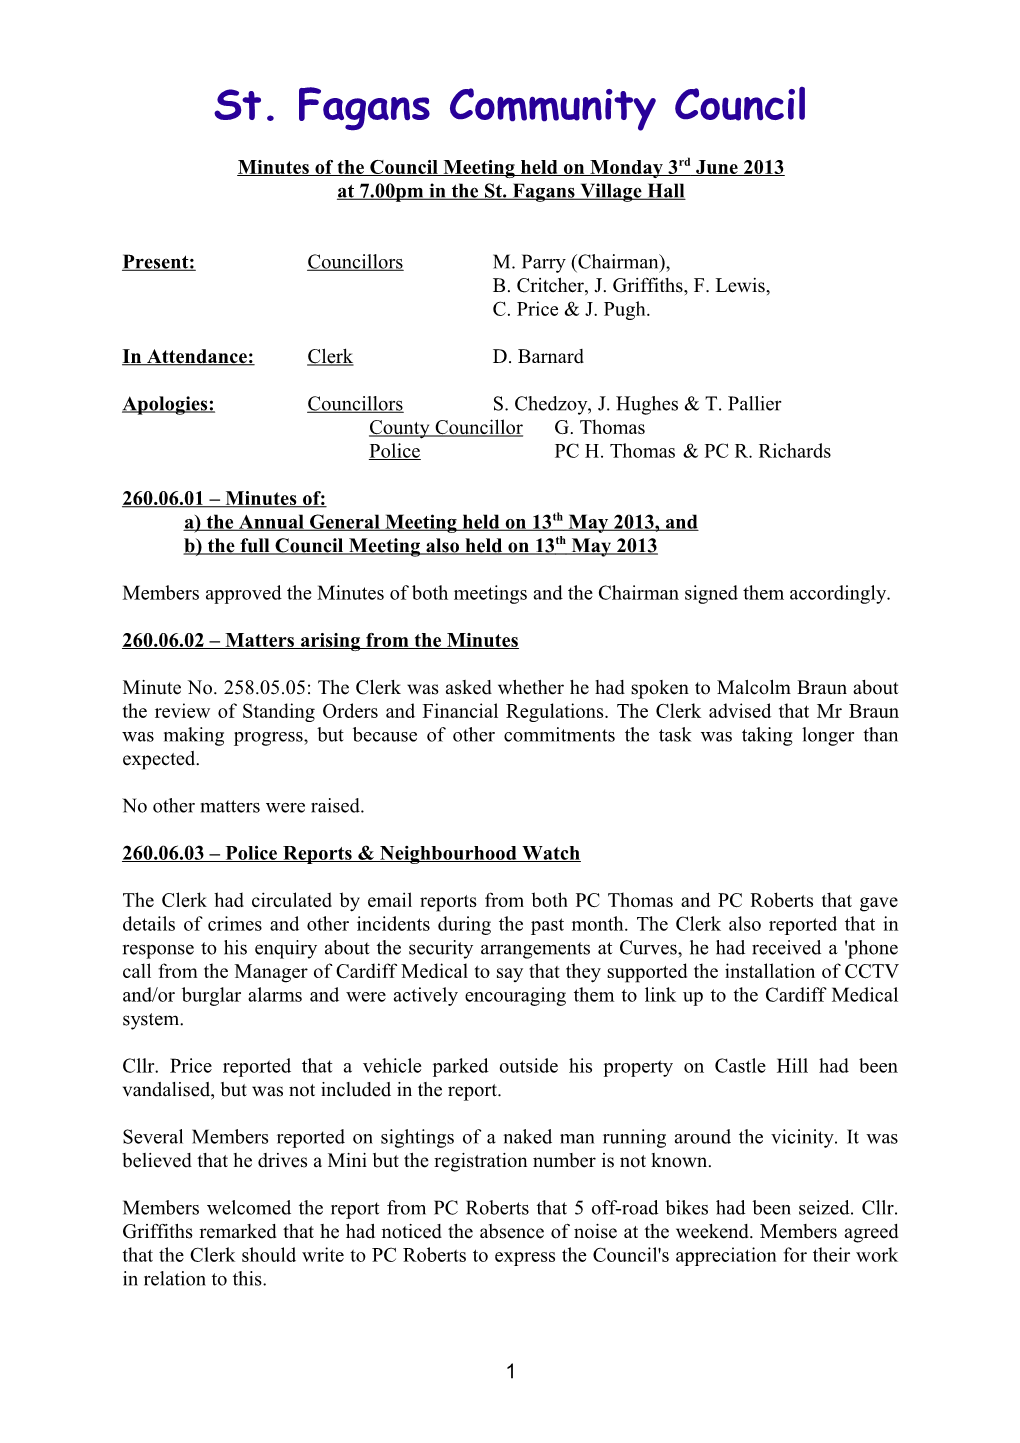 Minutes of the Council Meeting Held on Monday 3Rd June 2013